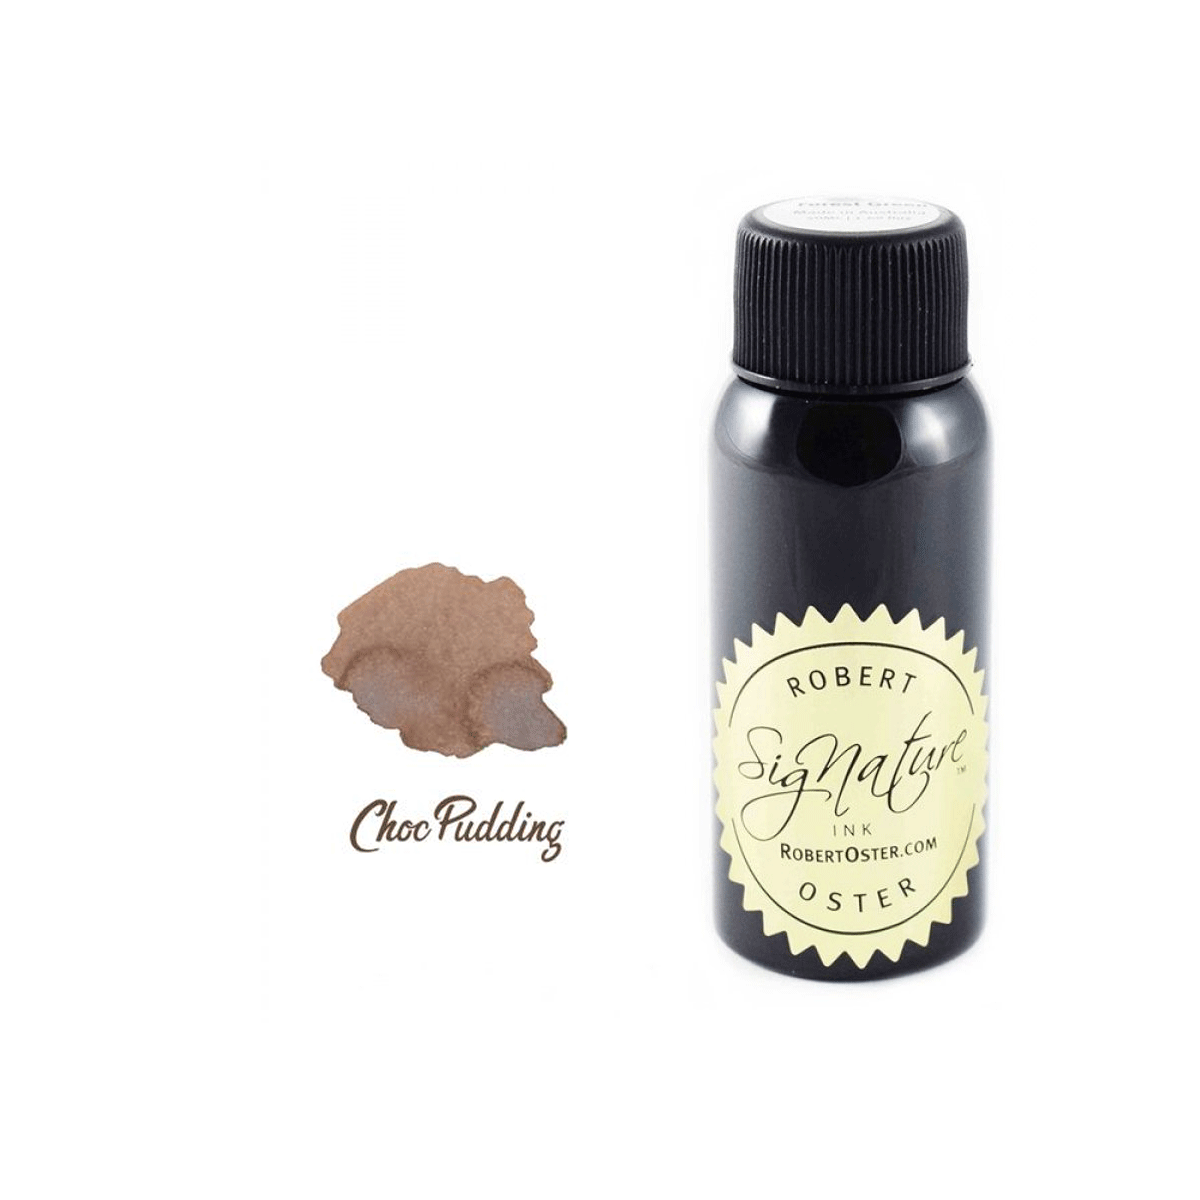 Robert Oster Signature Ink Bottle Holiday Season LE Choc Pudding - Pencraft the boutique